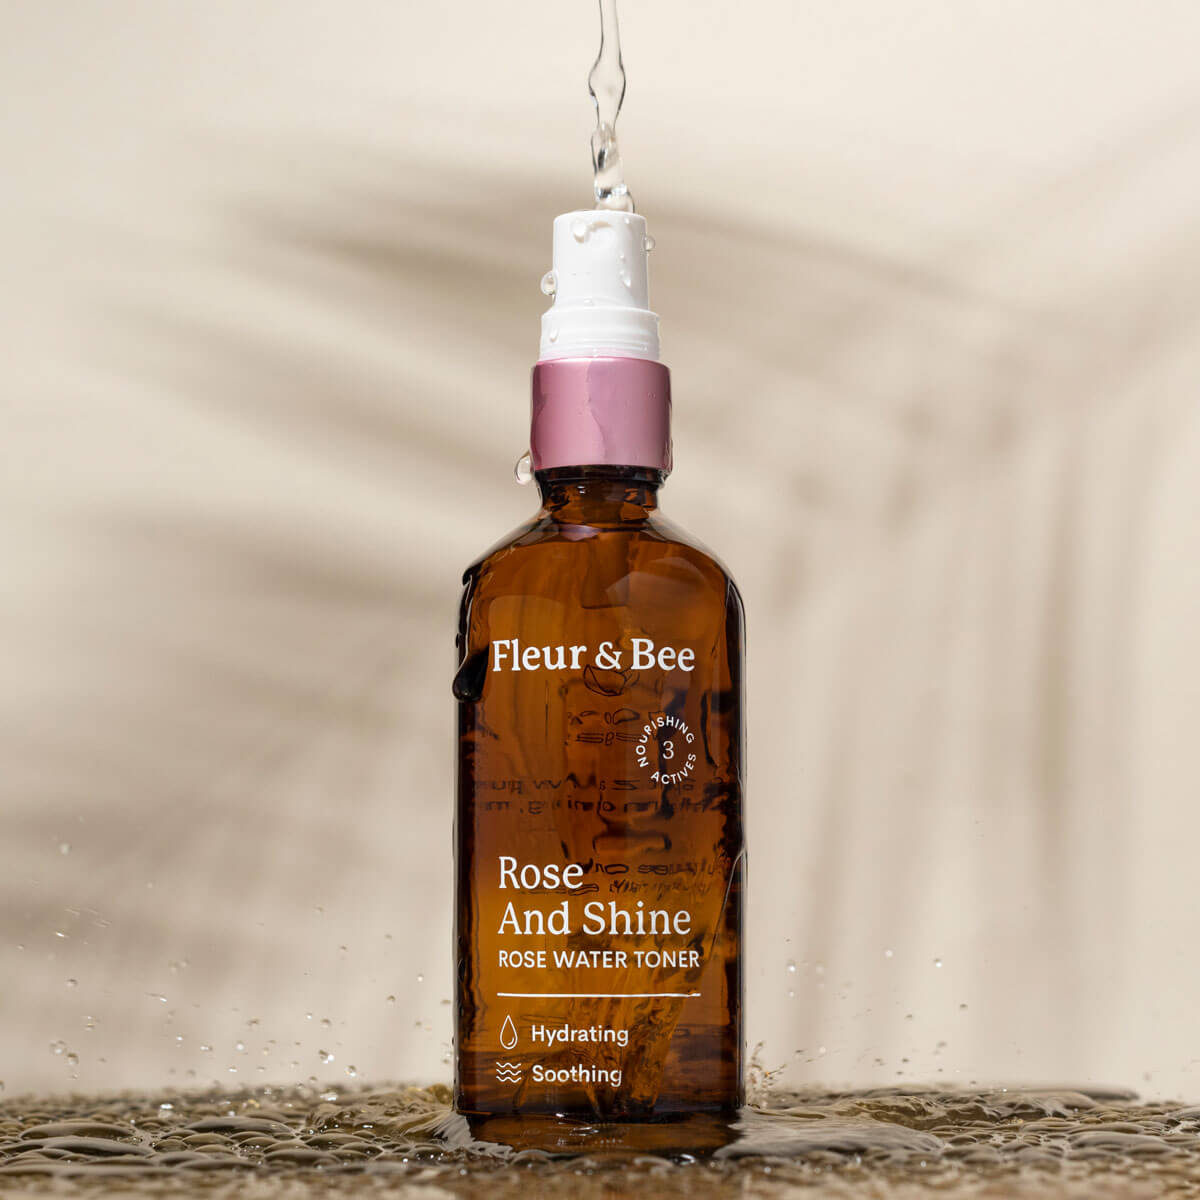 super hydrating rose water toner by Fleur & Bee